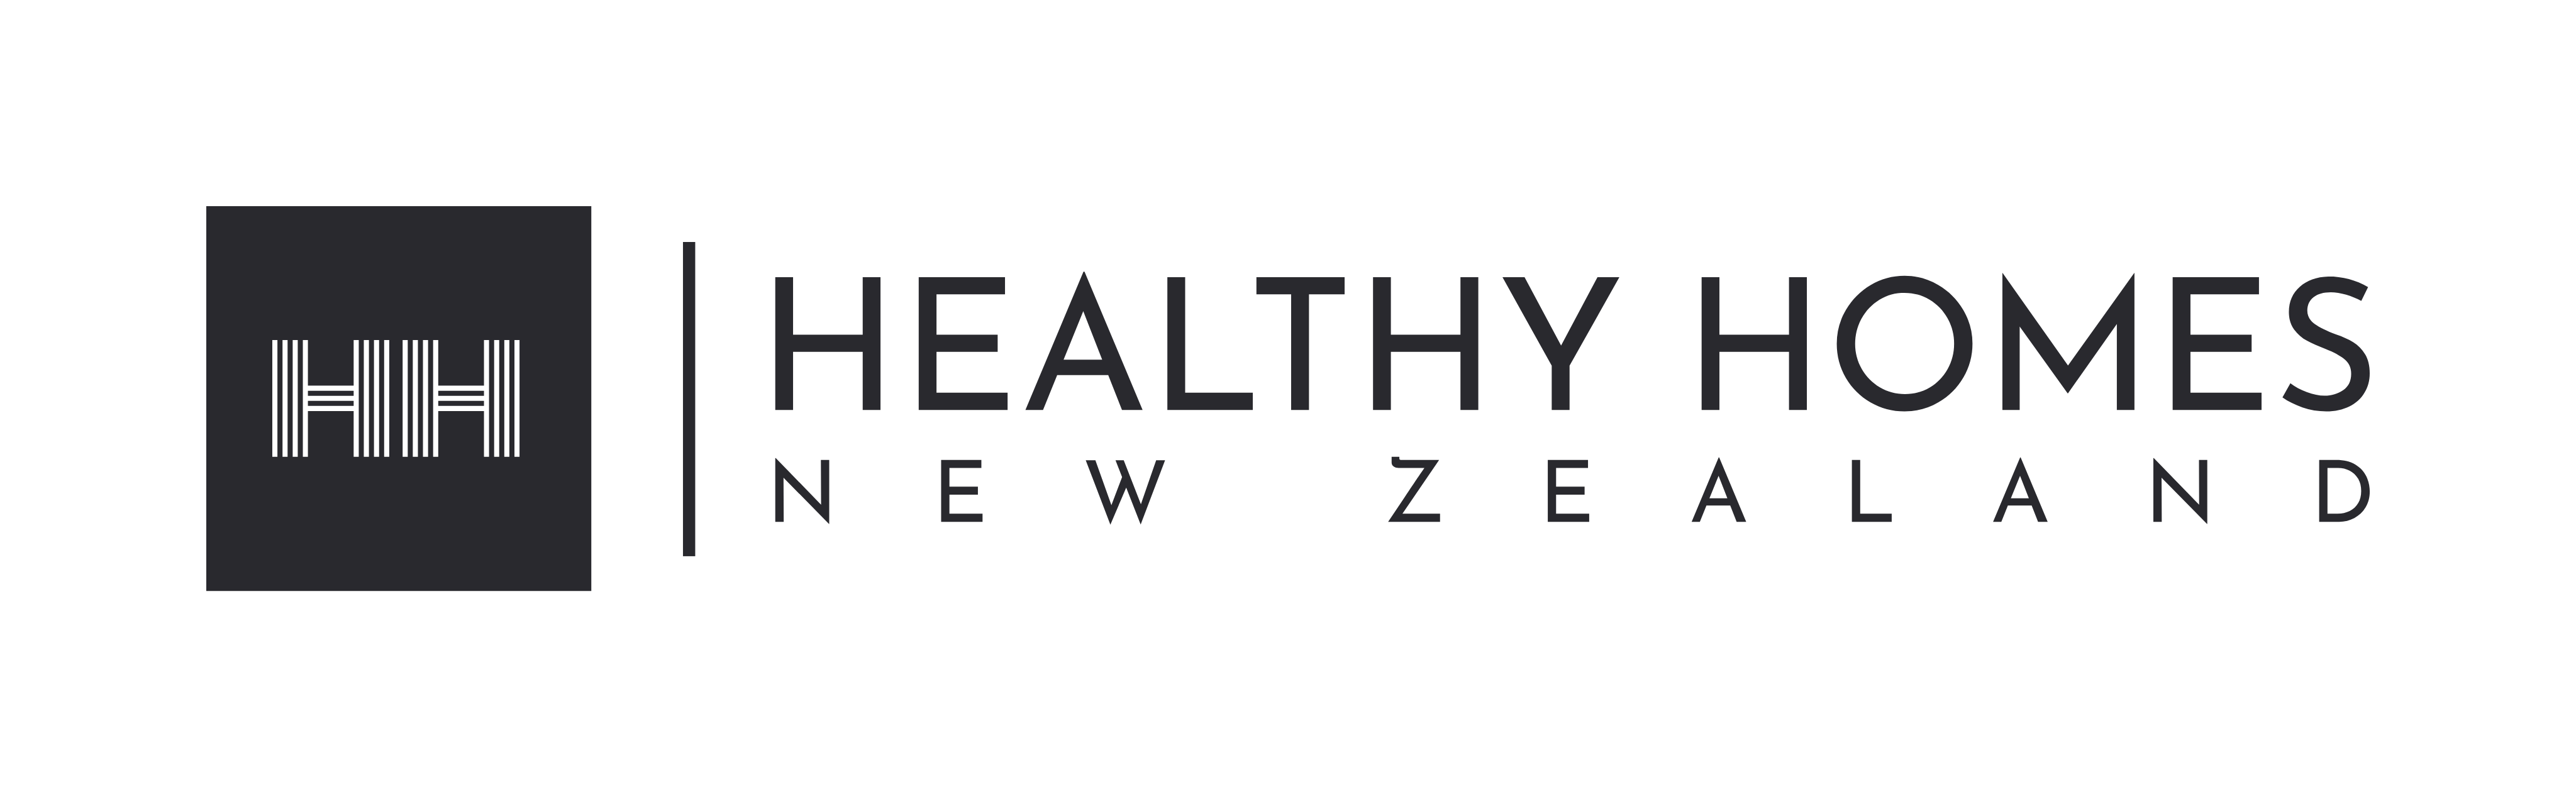 Healthy Homes New Zealand